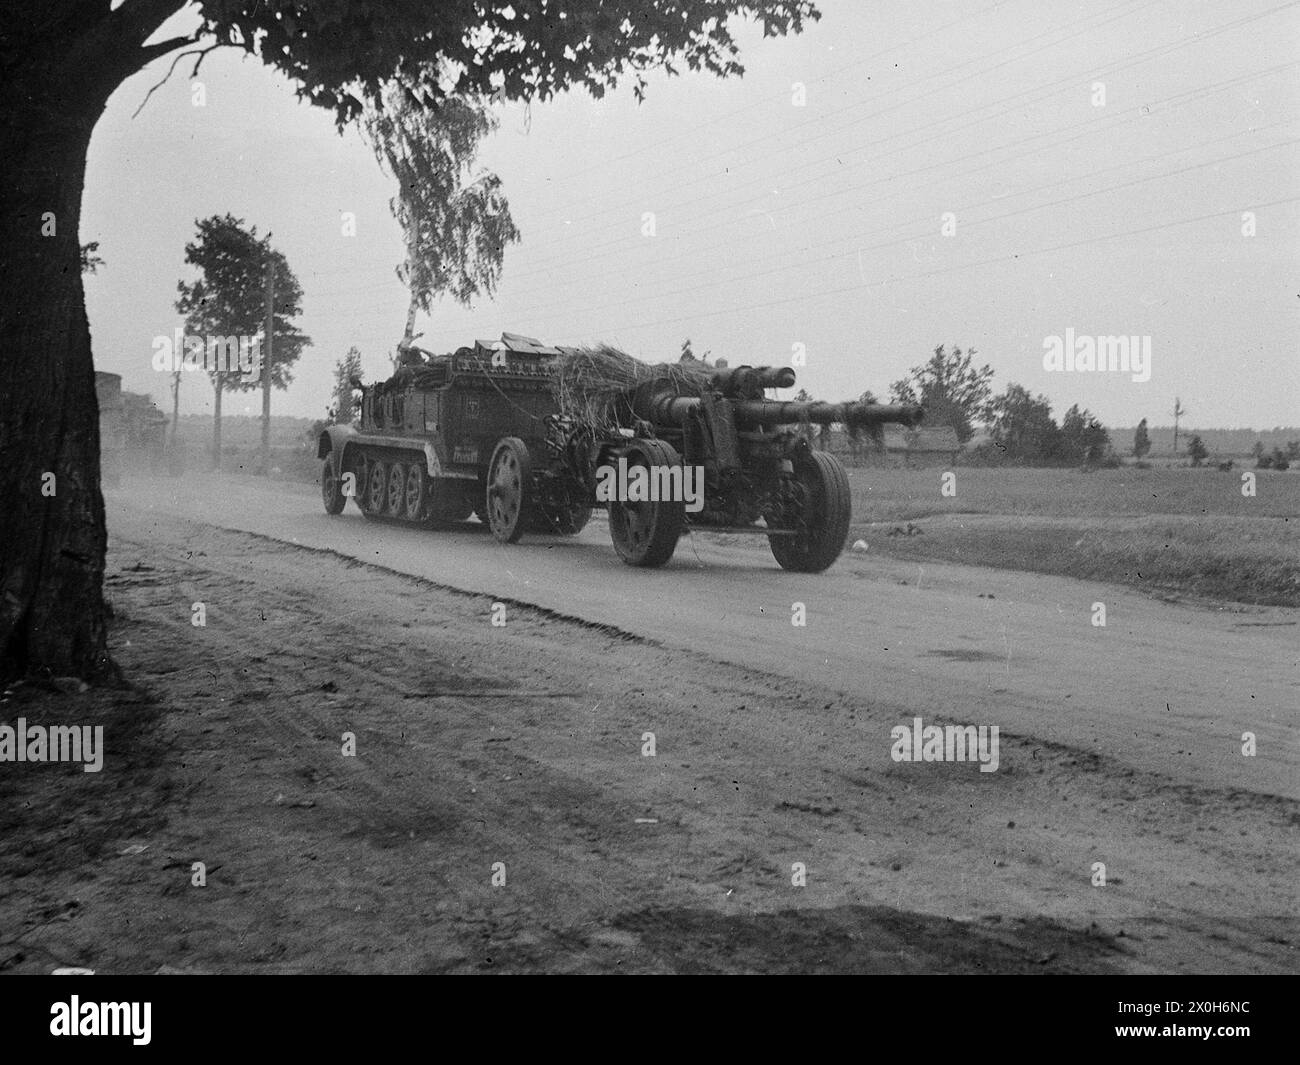 A 15cm field howitzer 18 is towed by a half-track vehicle in France. The picture was taken by a member of the 154th Infantry Regiment / 58th Infantry Division, in France. [automated translation] Stock Photo